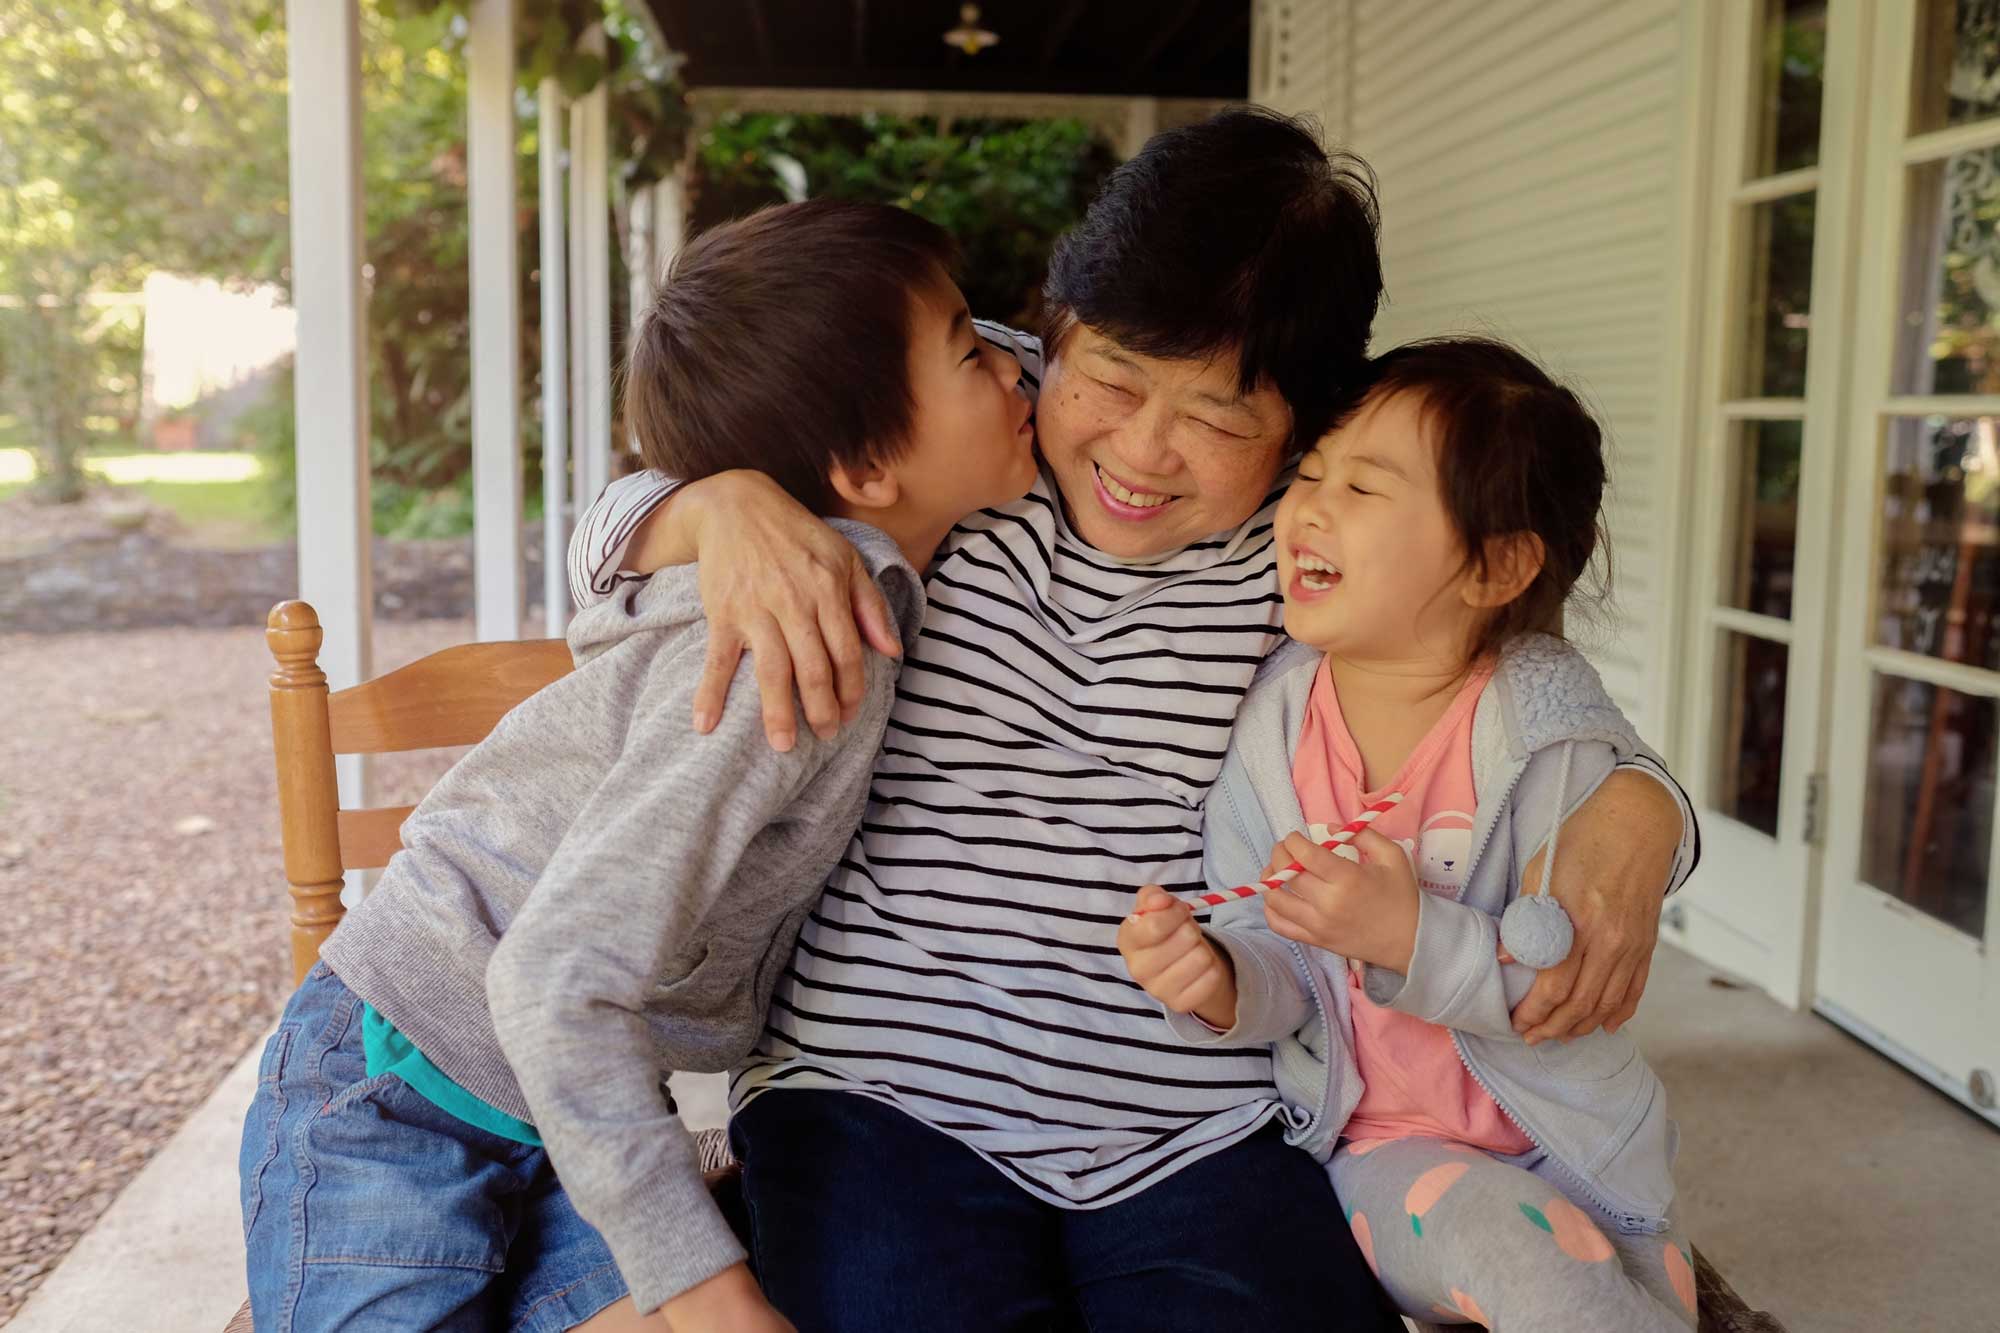 A woman, flanked by two young children, laughing and hugging